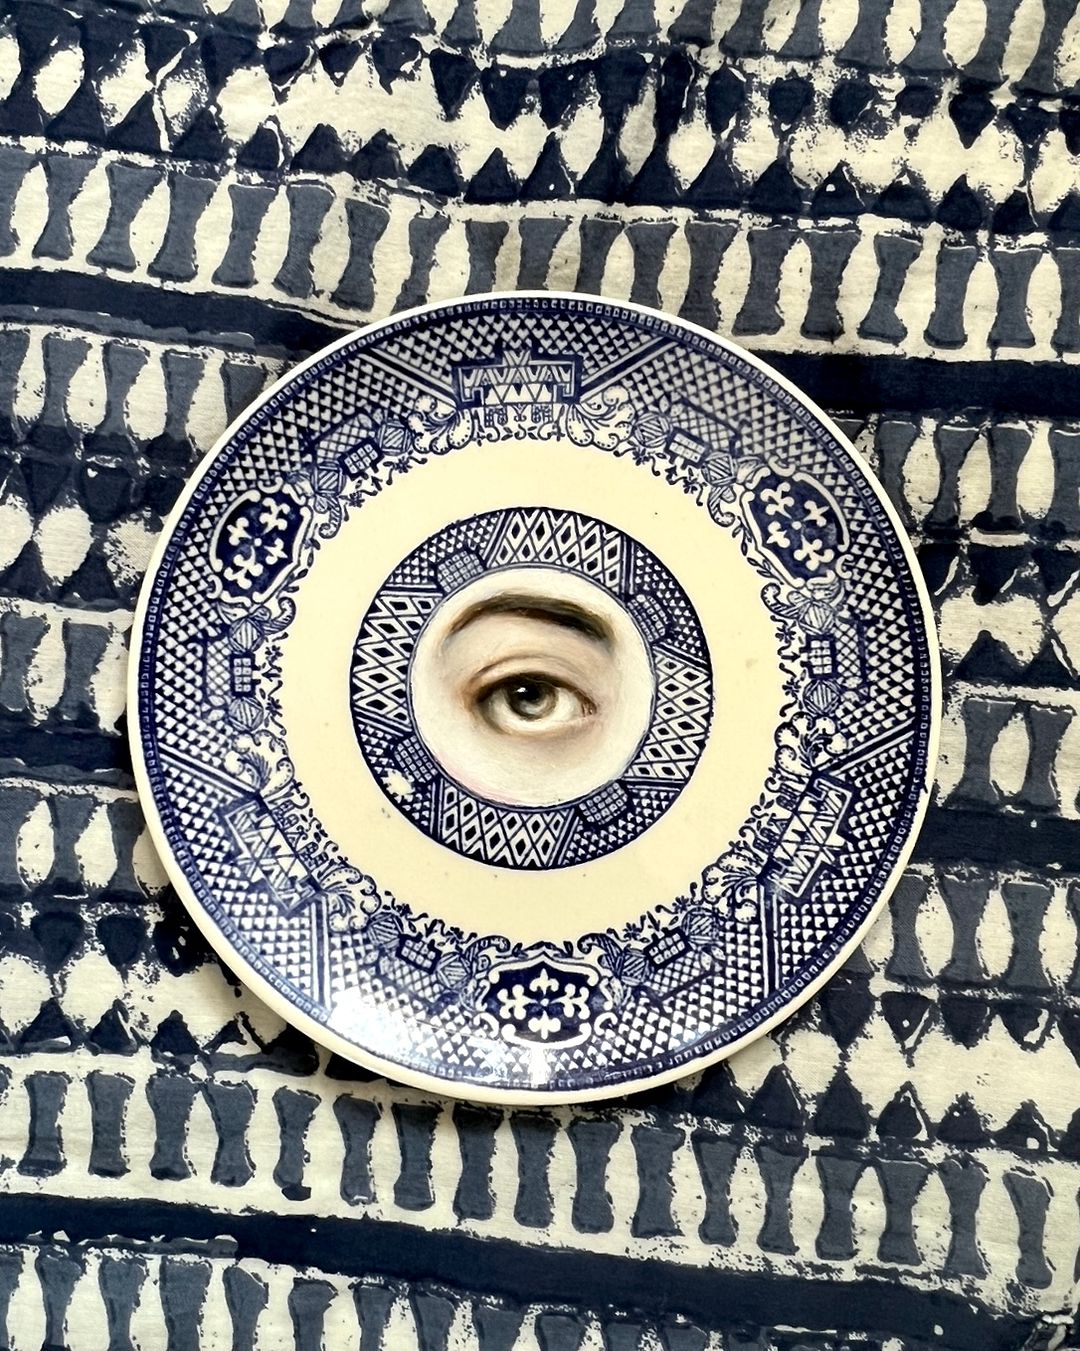 11. @susannah.carson artwork of an eye with an eyebrow in muted colours painted in the centre of a china plate with blue and white designs